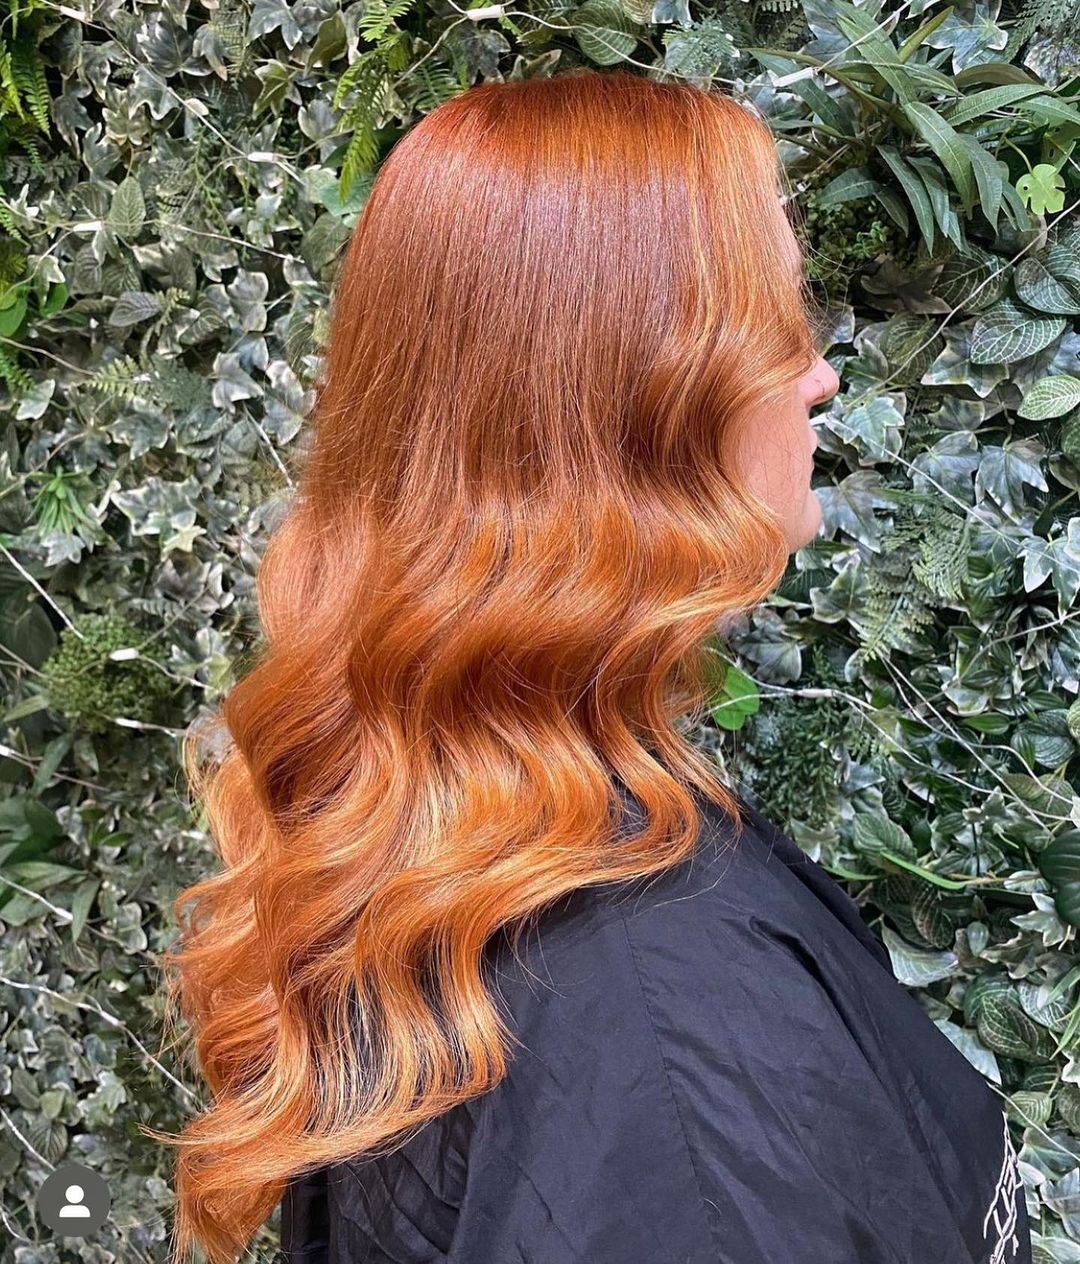 Autumn Hair Trends You’ll Want To Try!